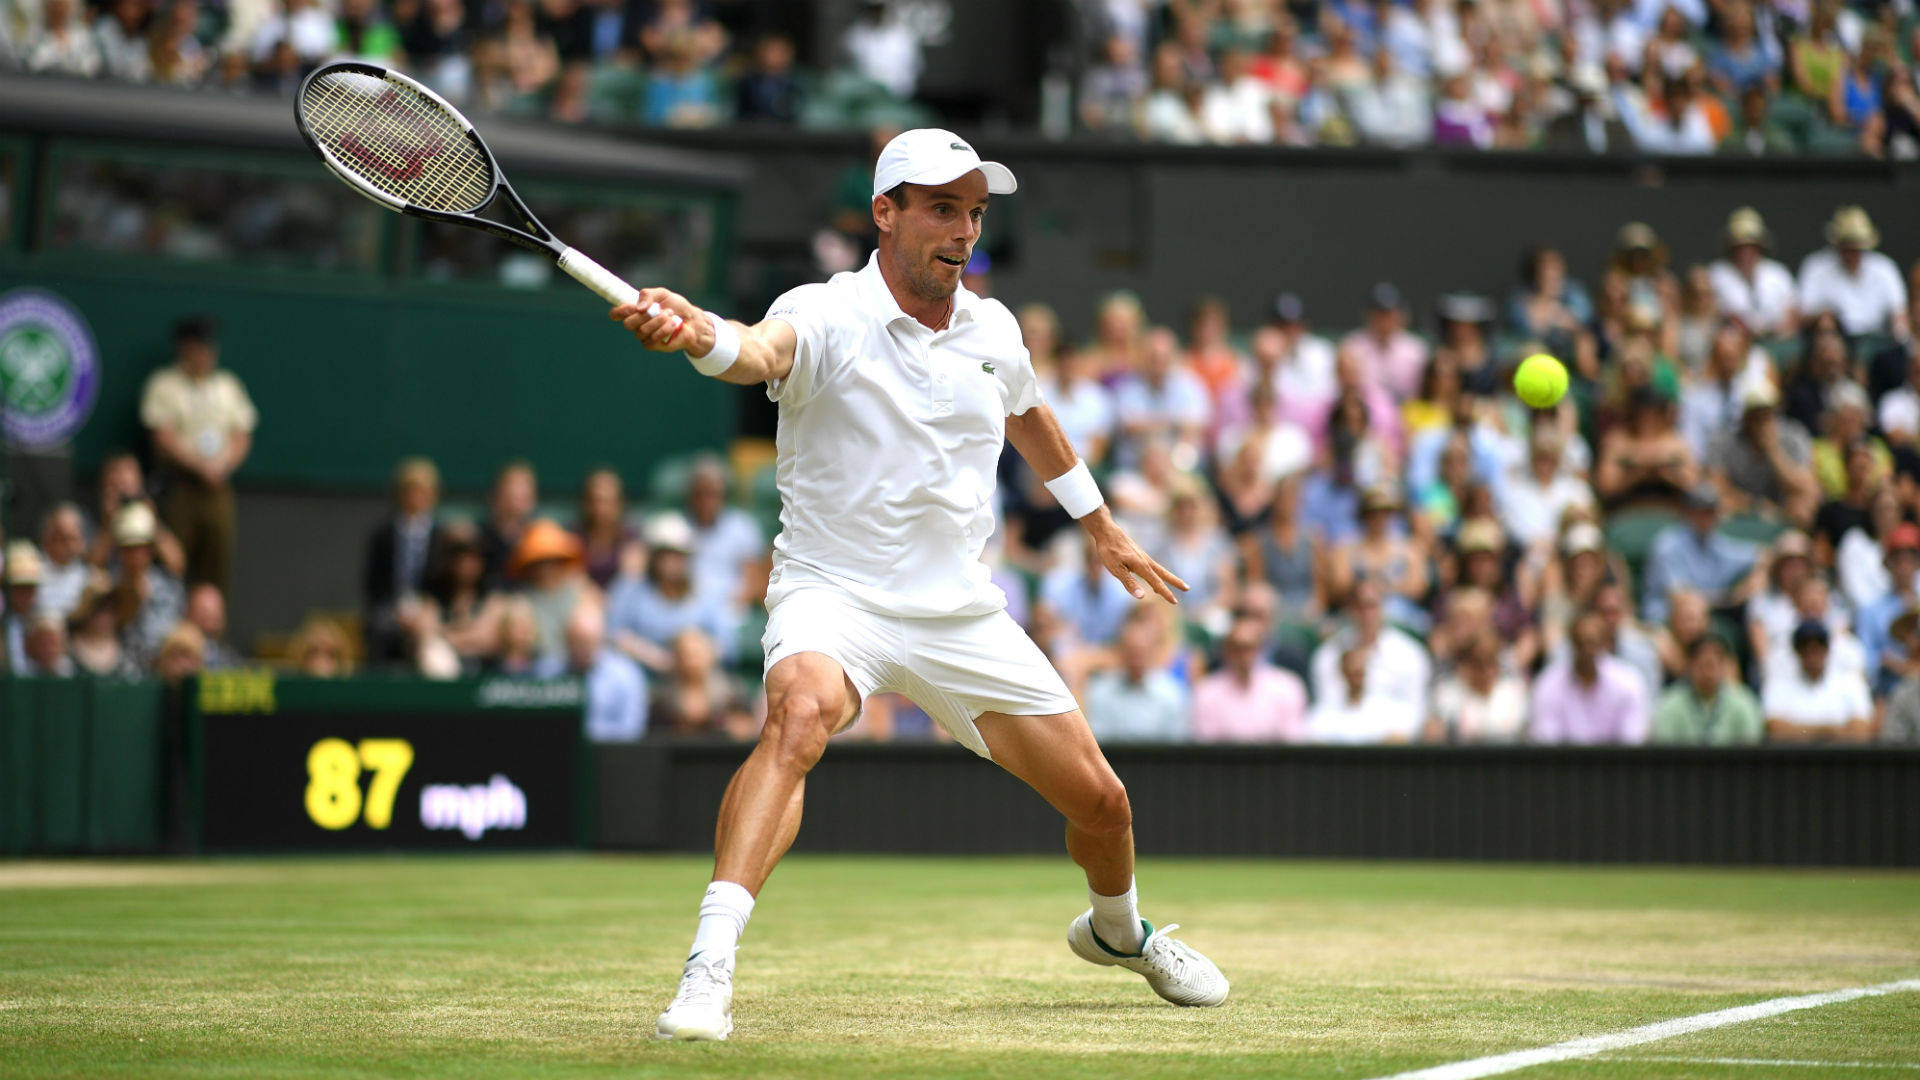 He will rather have been playing in a Wimbledon final on Sunday, but Roberto Bautista Agut has a lively weekend  to look forward to.